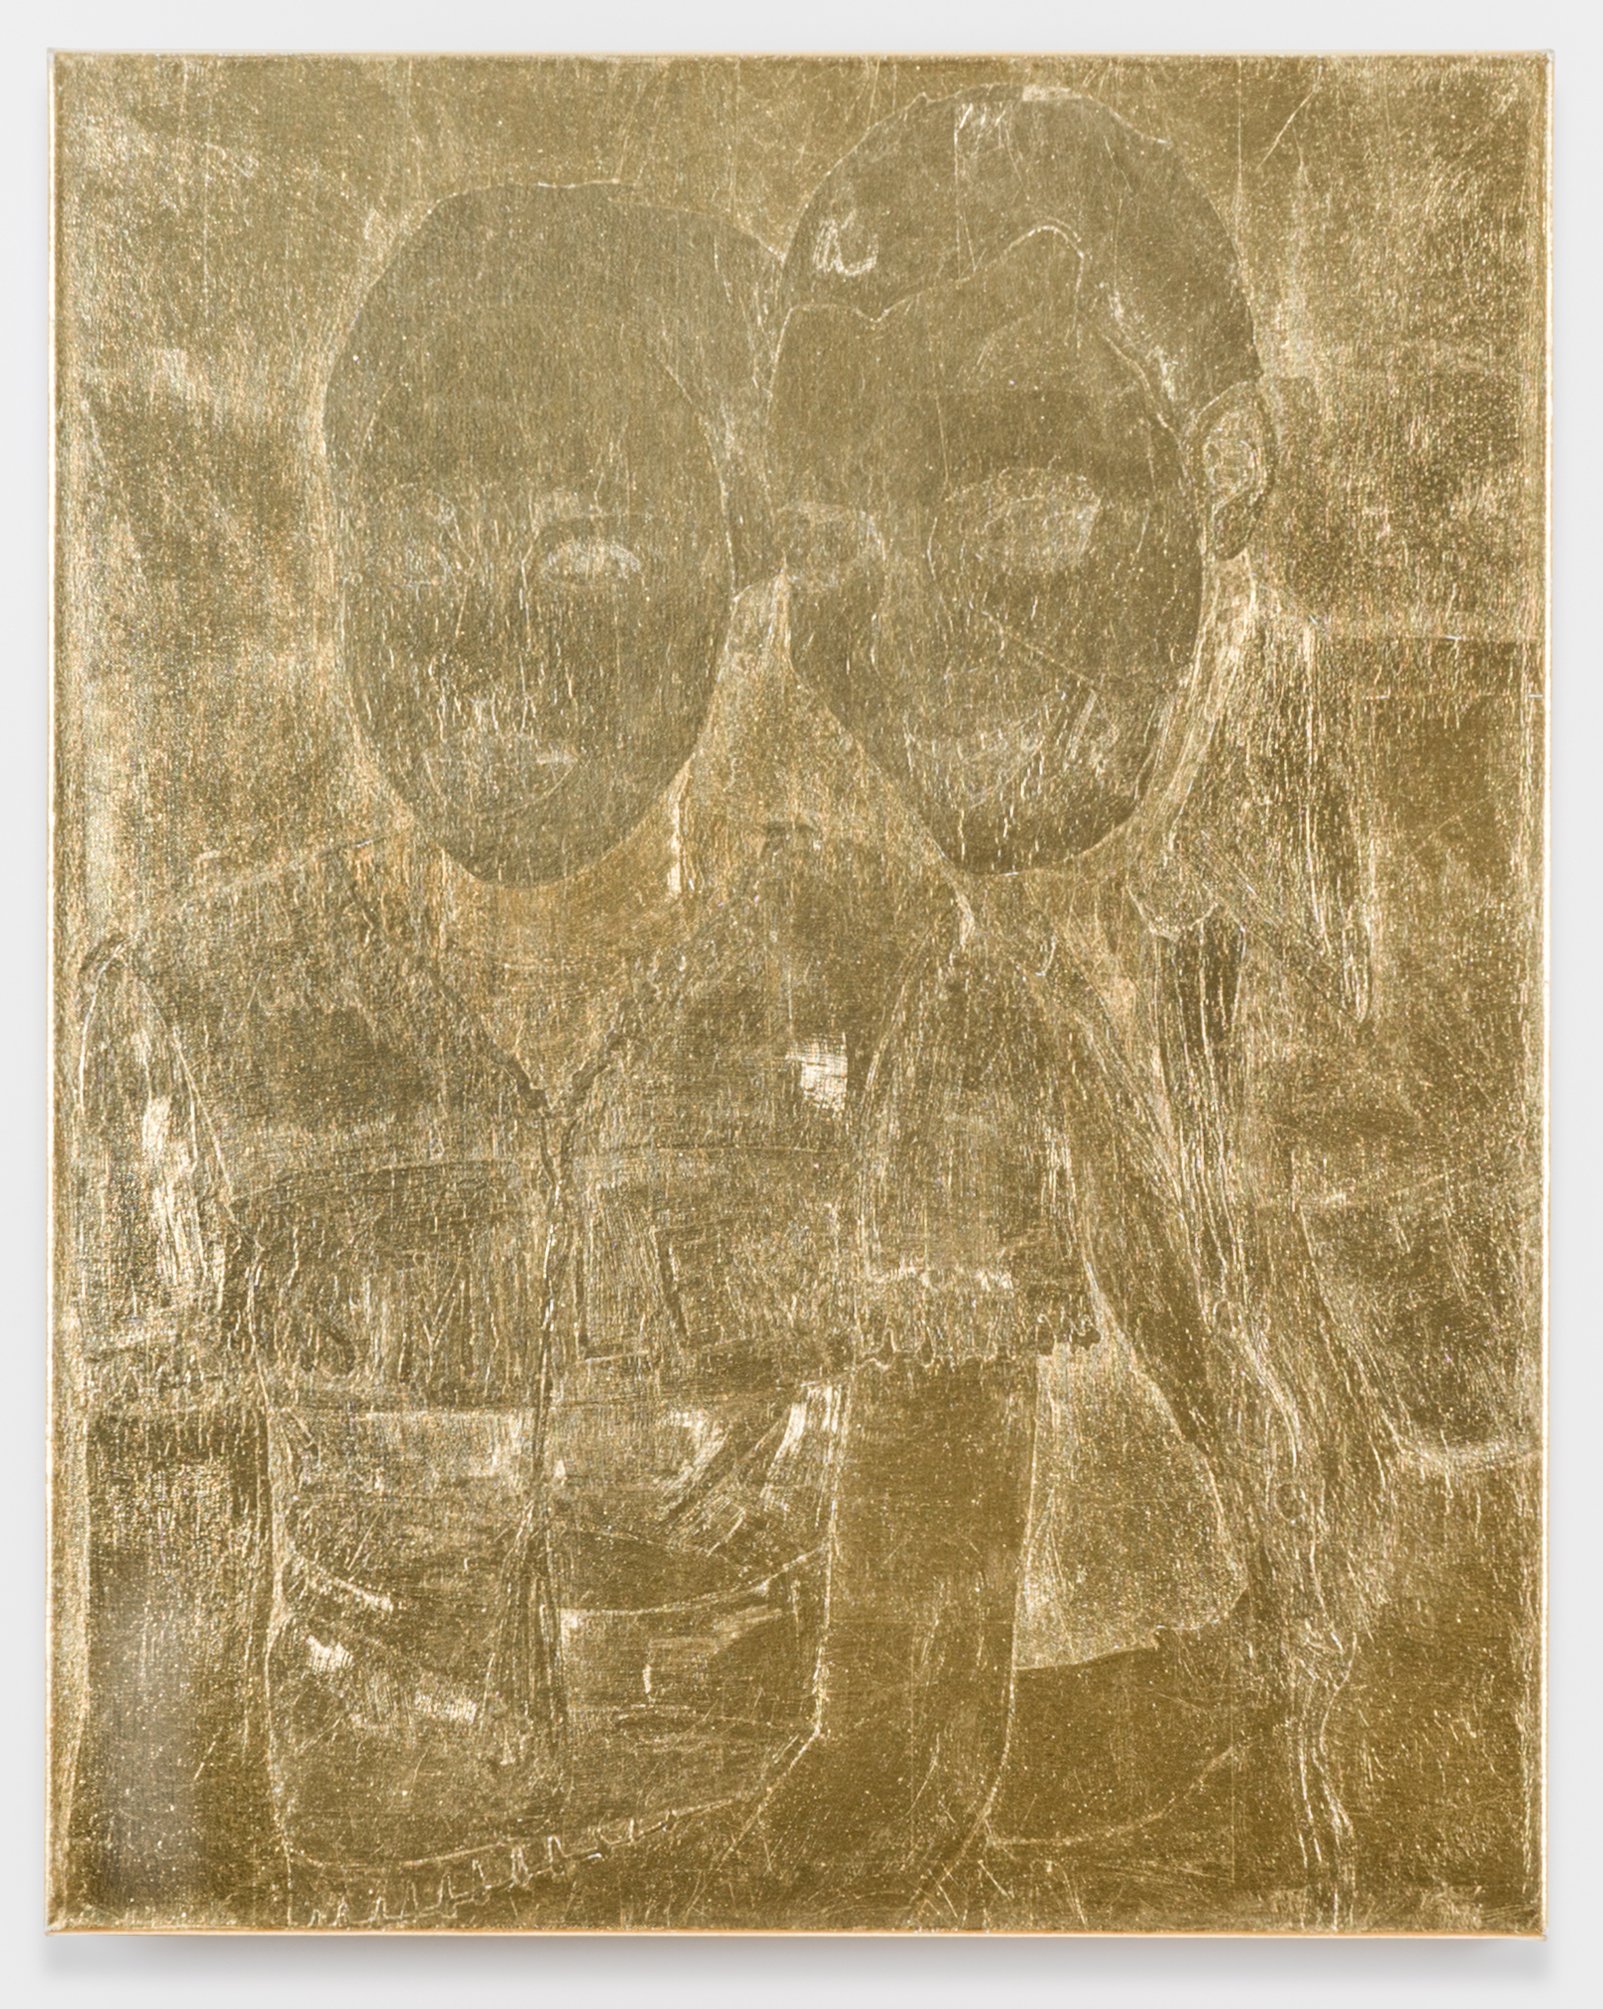   SMILING ANYHOW (for M. S.),  1970/2021, 30 x 24 inches, composition gold leaf on canvas 